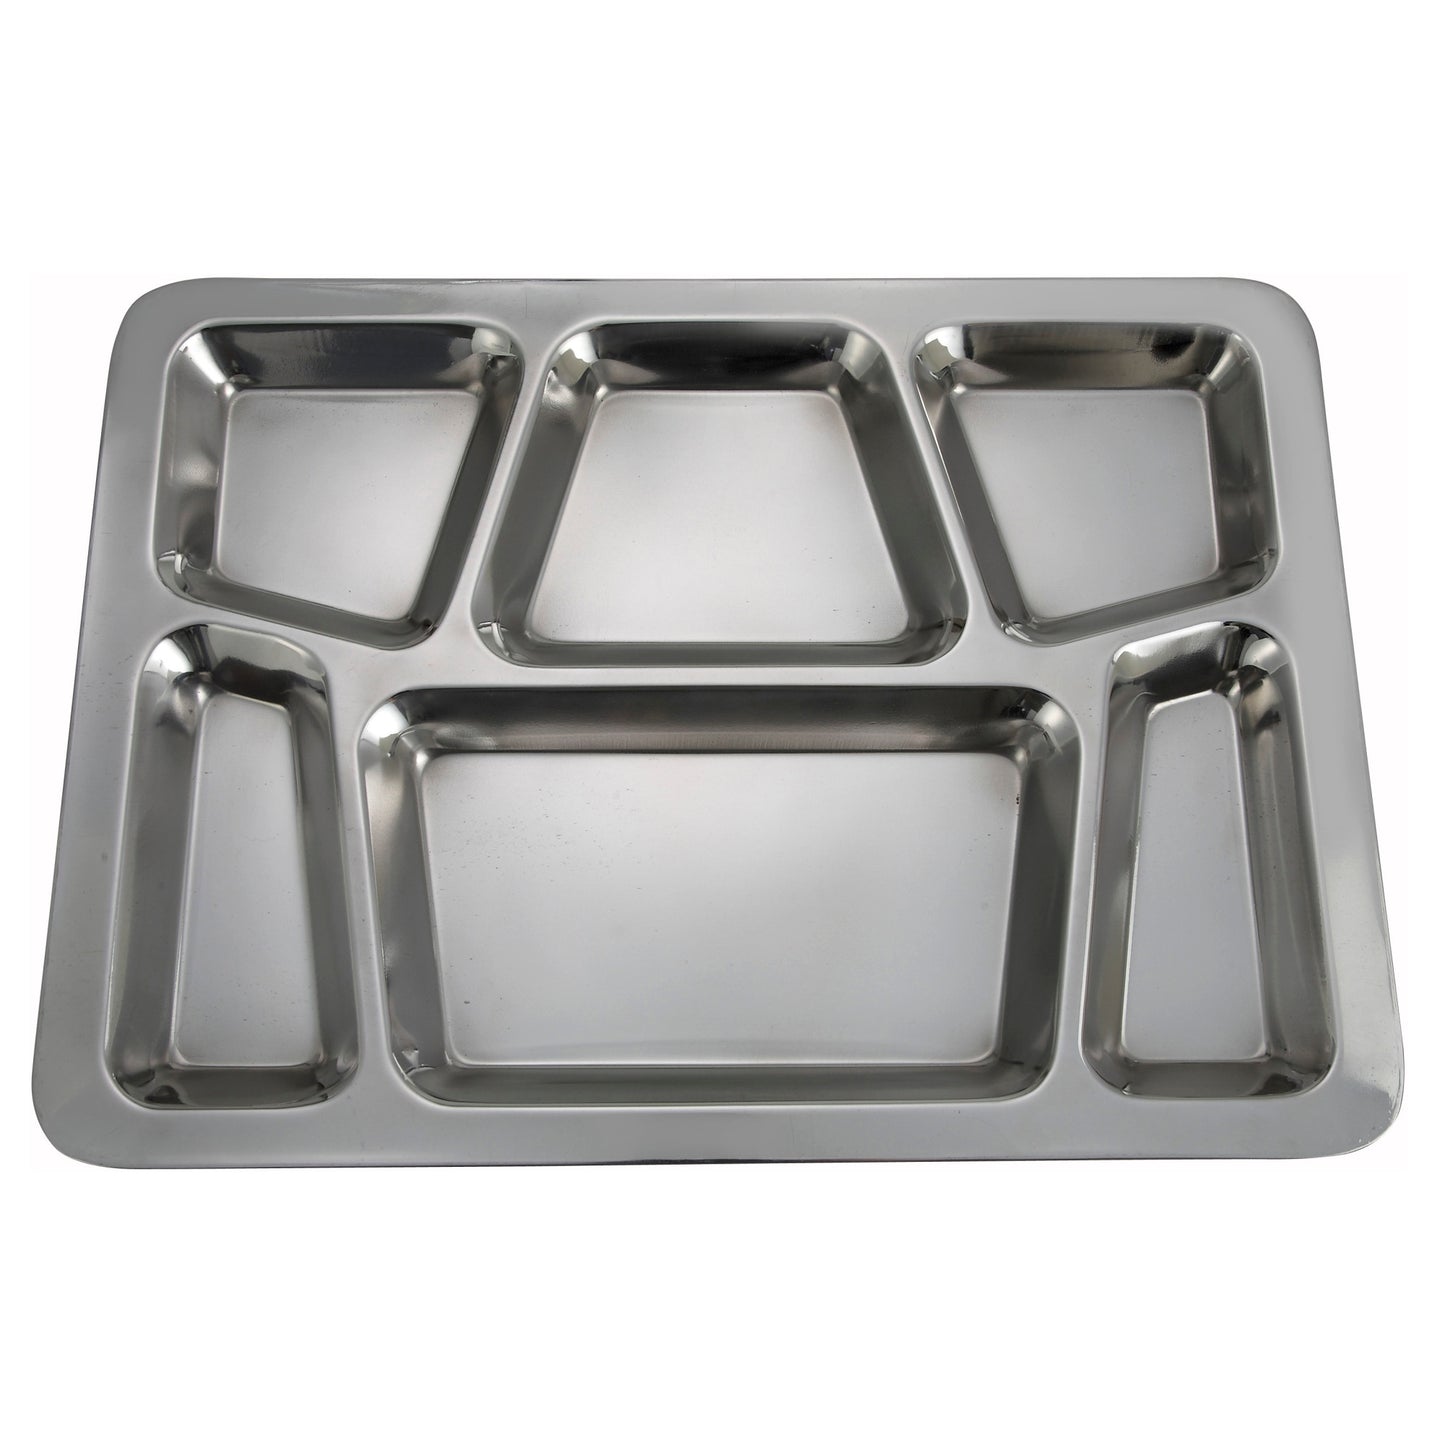 SMT-2 - Stainless Steel 6 Compartment Mess Trays - B